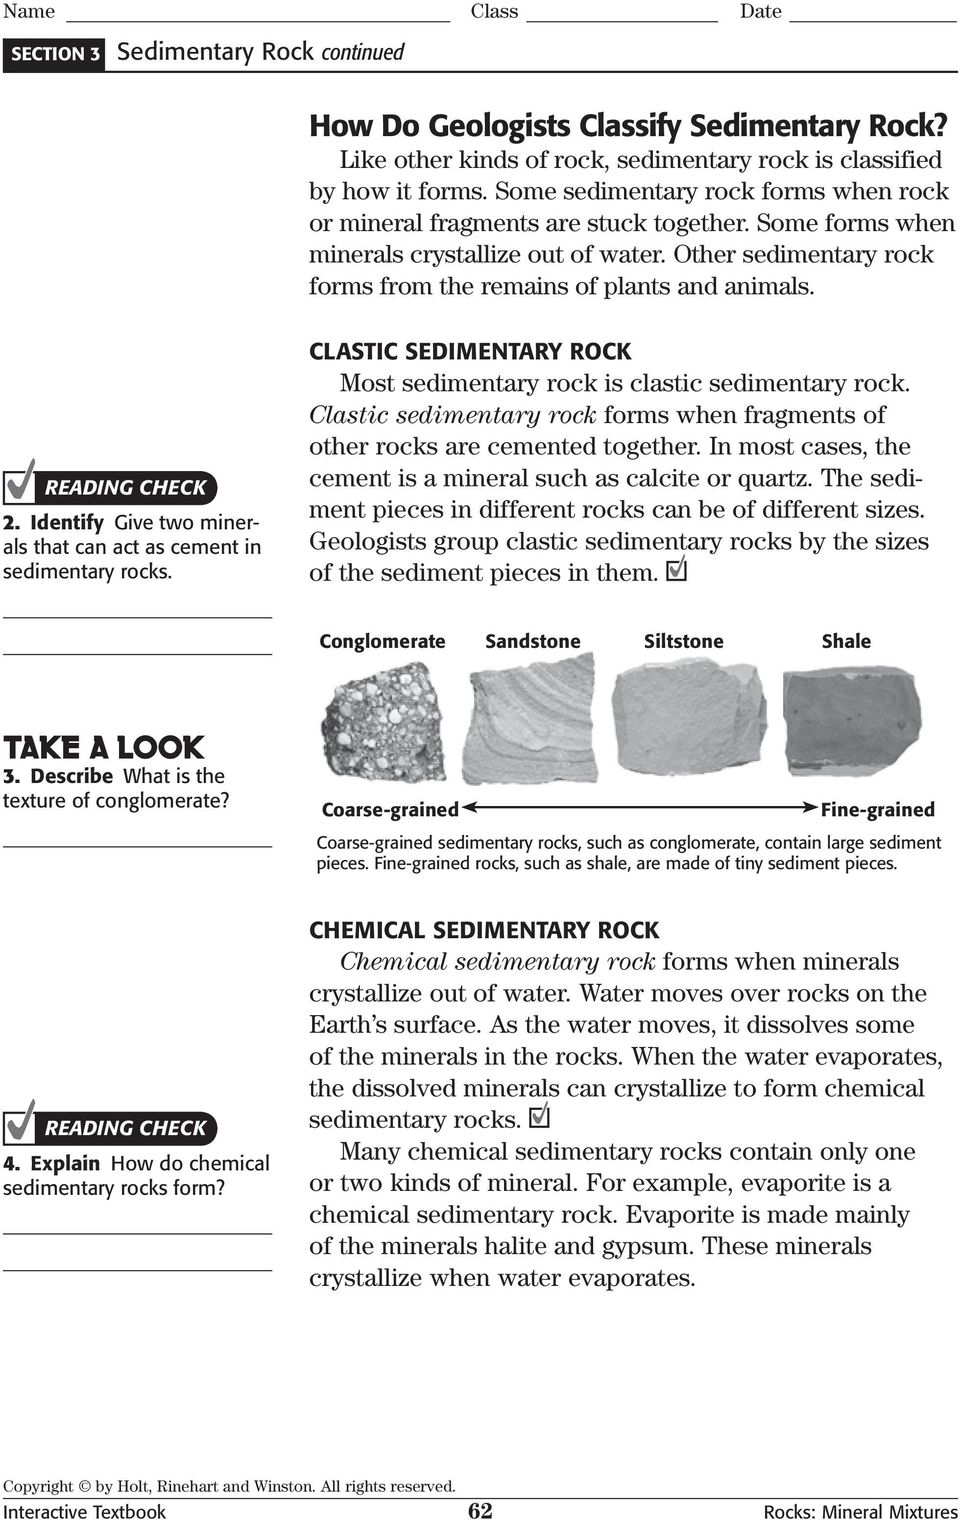 2. Identify Give two minerals that can act as cement in sedimentary rocks. CLASTIC SEDIMENTARY ROCK Most sedimentary rock is clastic sedimentary rock.